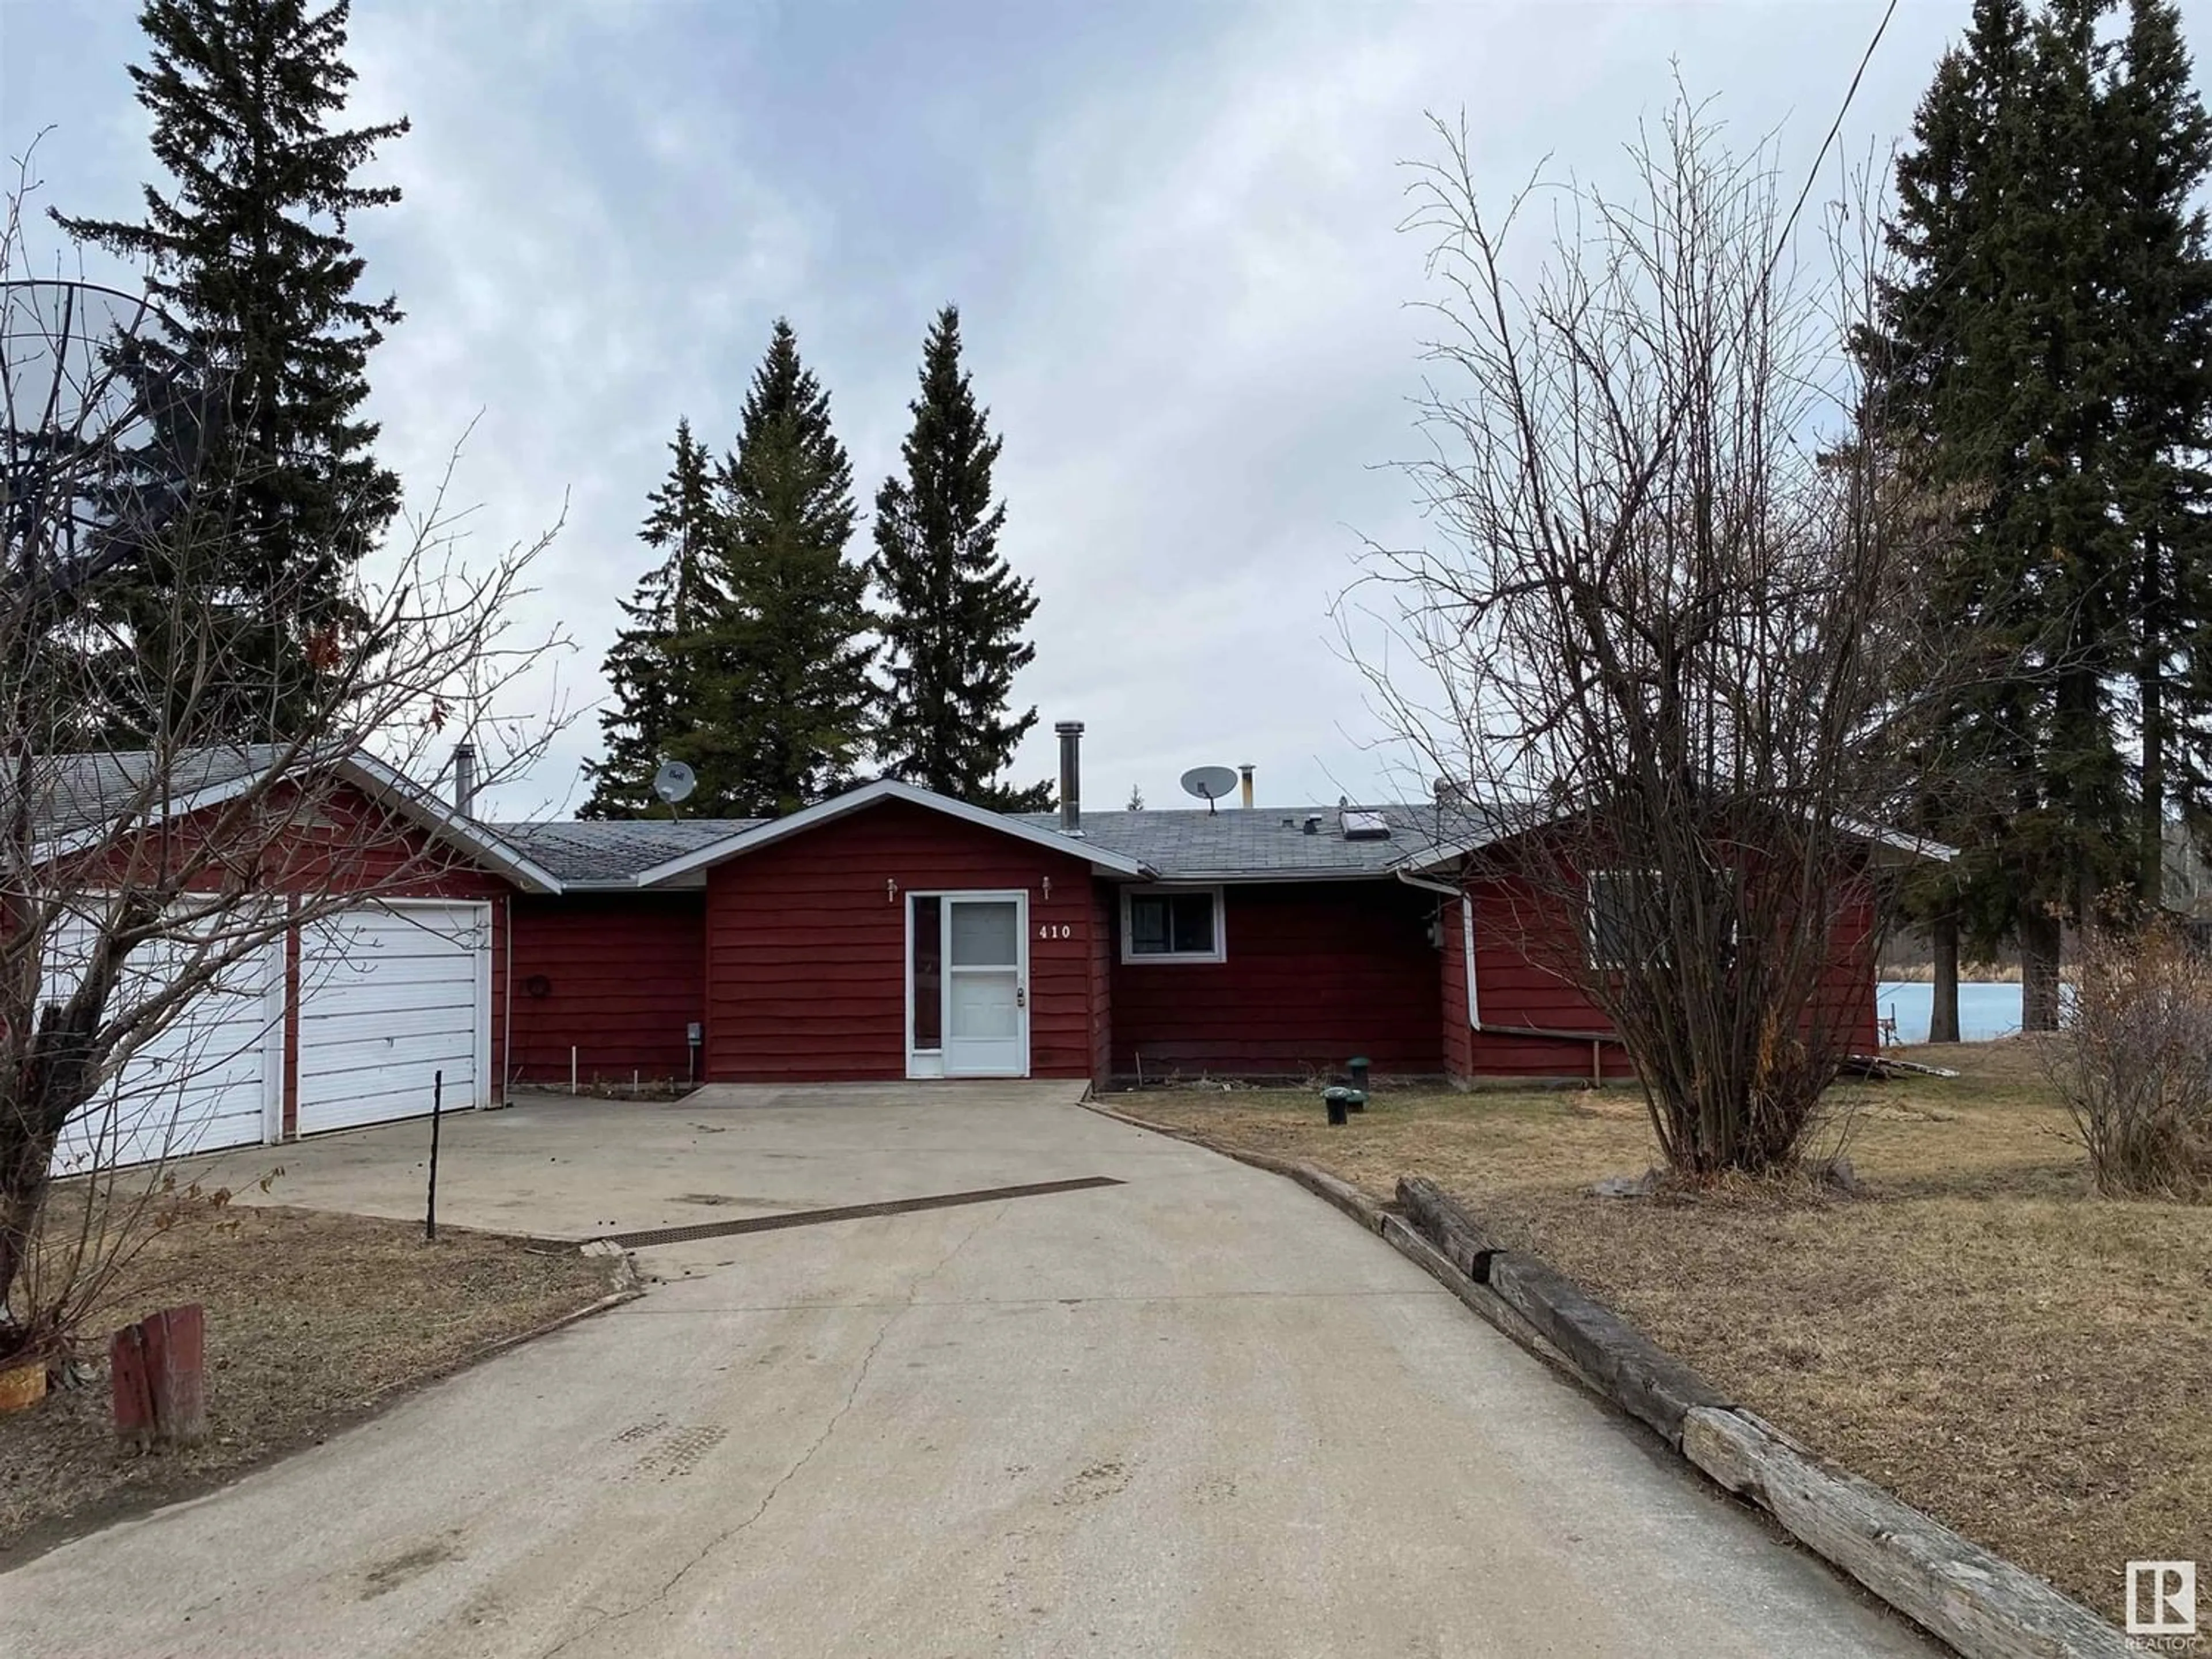 Standard kitchen for 410 Spruce AV, Rural Athabasca County Alberta T0A0M0